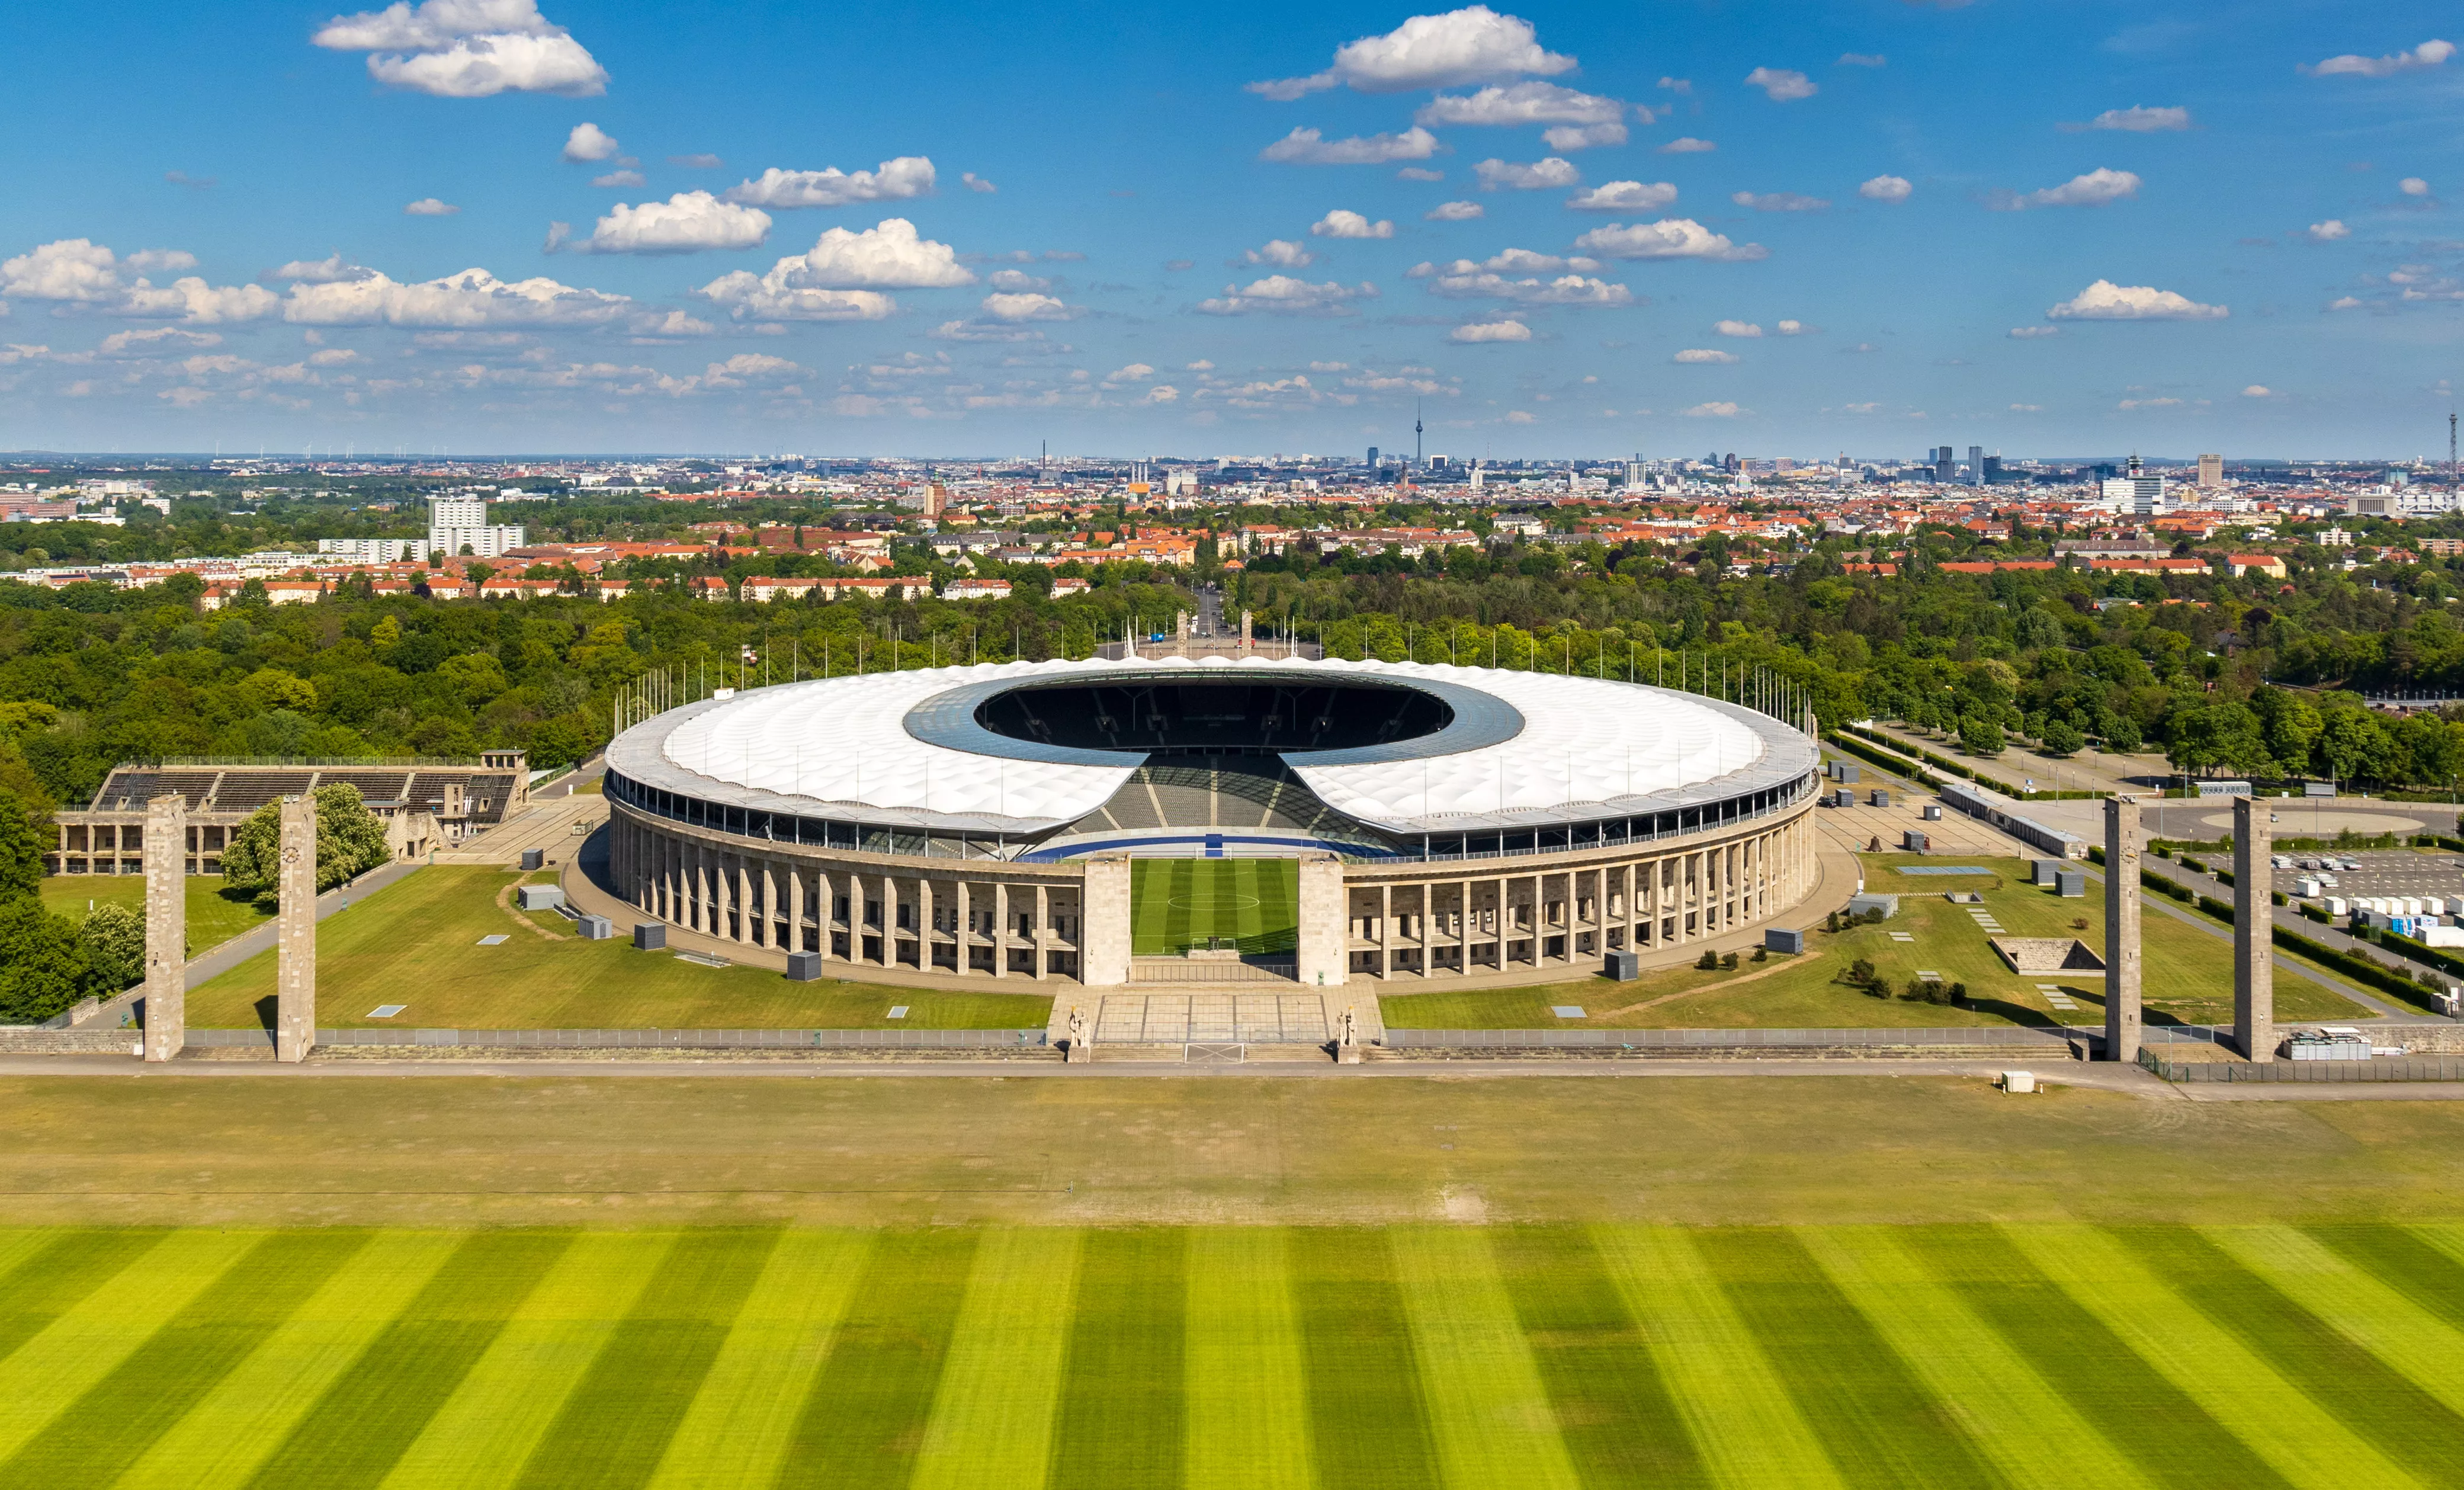 Olympiastadion in Germany, Europe | Football - Rated 4.7